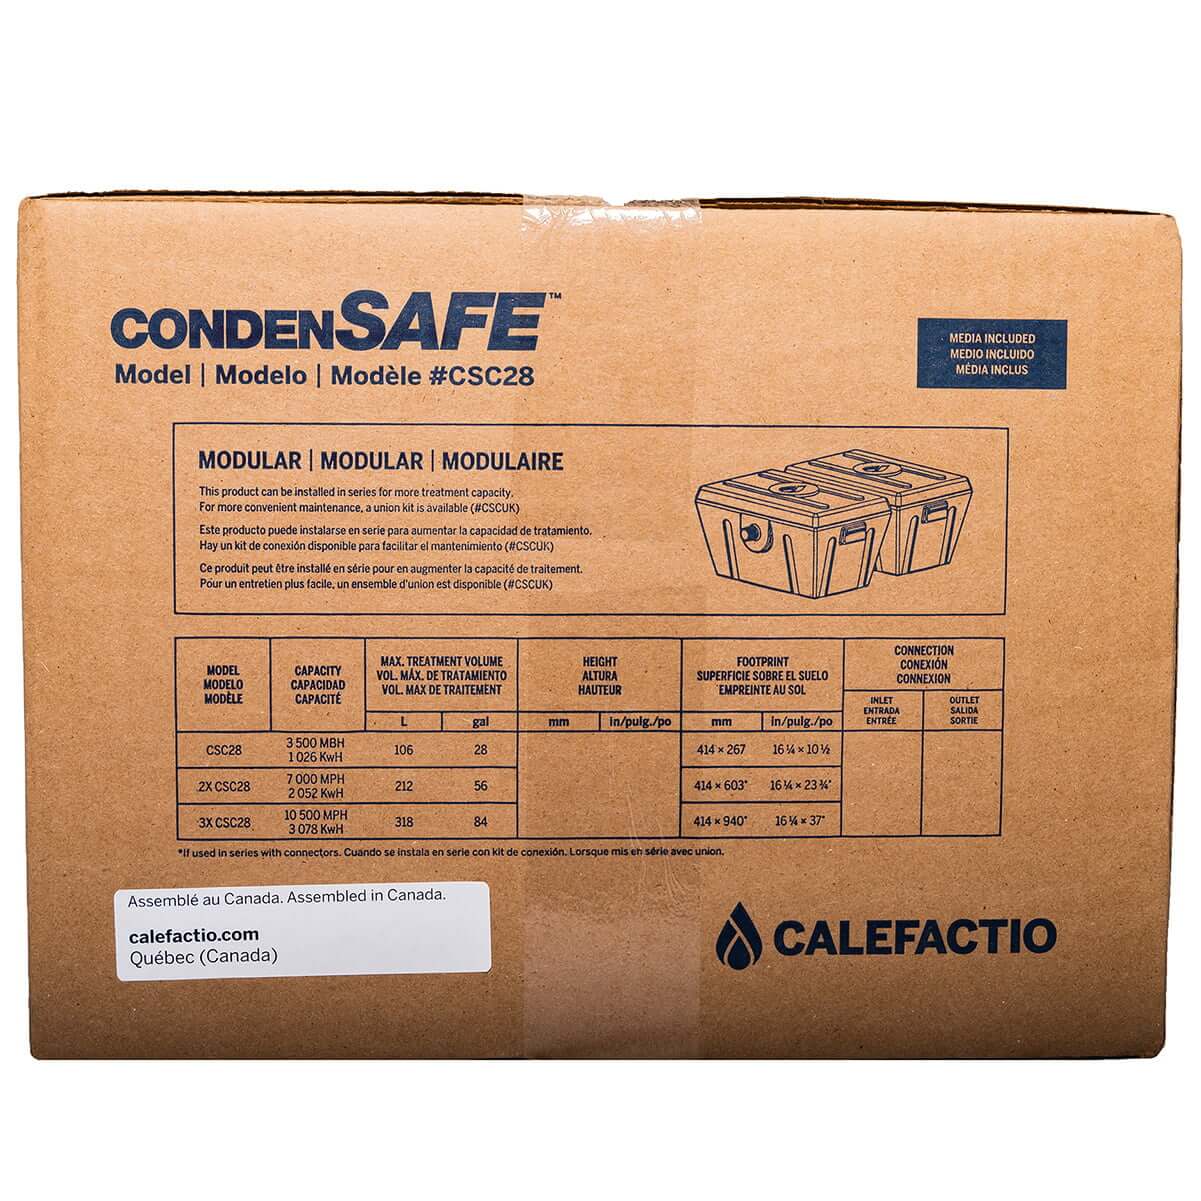 Calefactio CSC28 commercial Condensafe condensate neutralizer kit for LPG NPG gas boiler and water heater - box